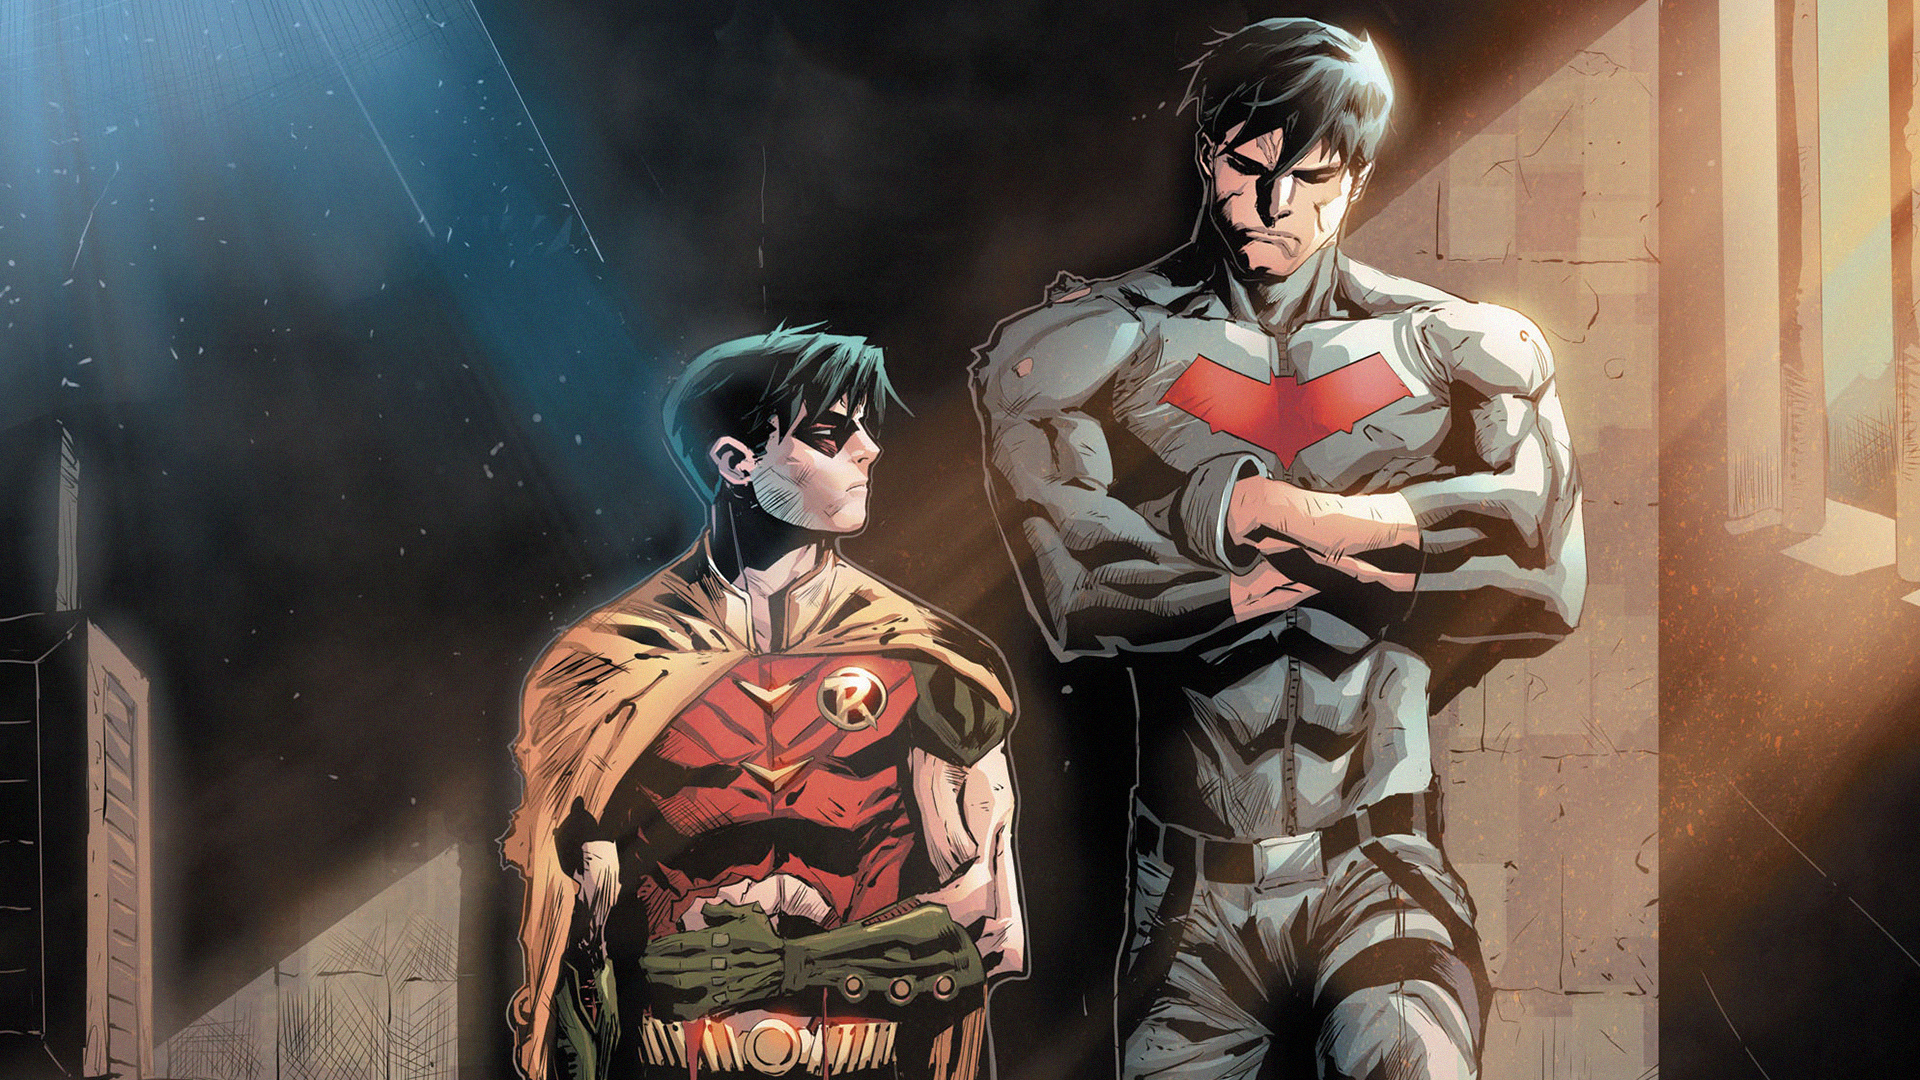 1920x1080 Jason Todd And Robin Dc Comic Art Laptop Full HD 1080P HD 4k Wallpapers, Images, Backgrounds, Photos and Pictures